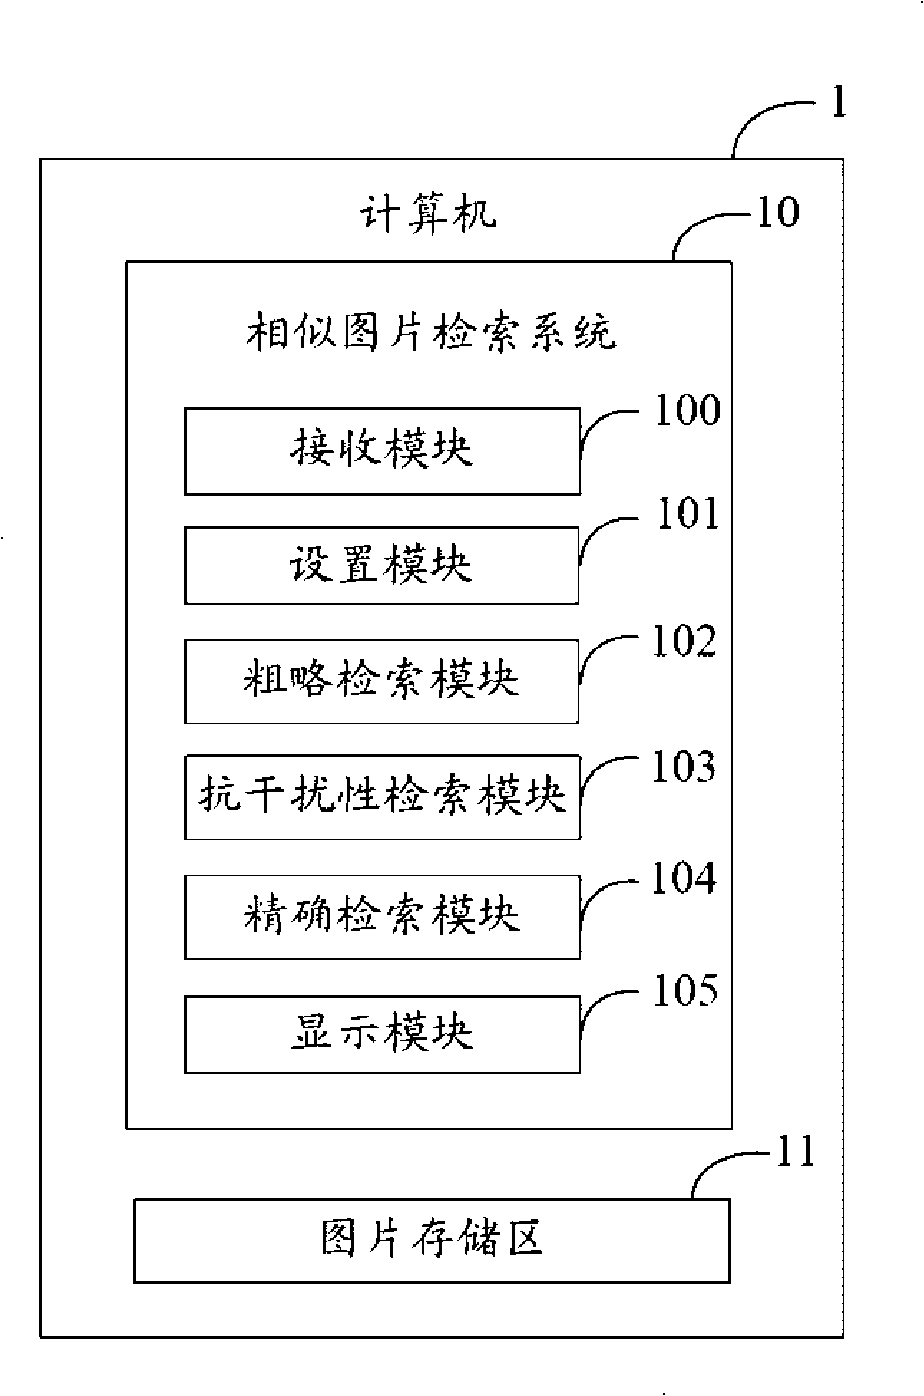 Retrieval system and retrieval method for similar pictures